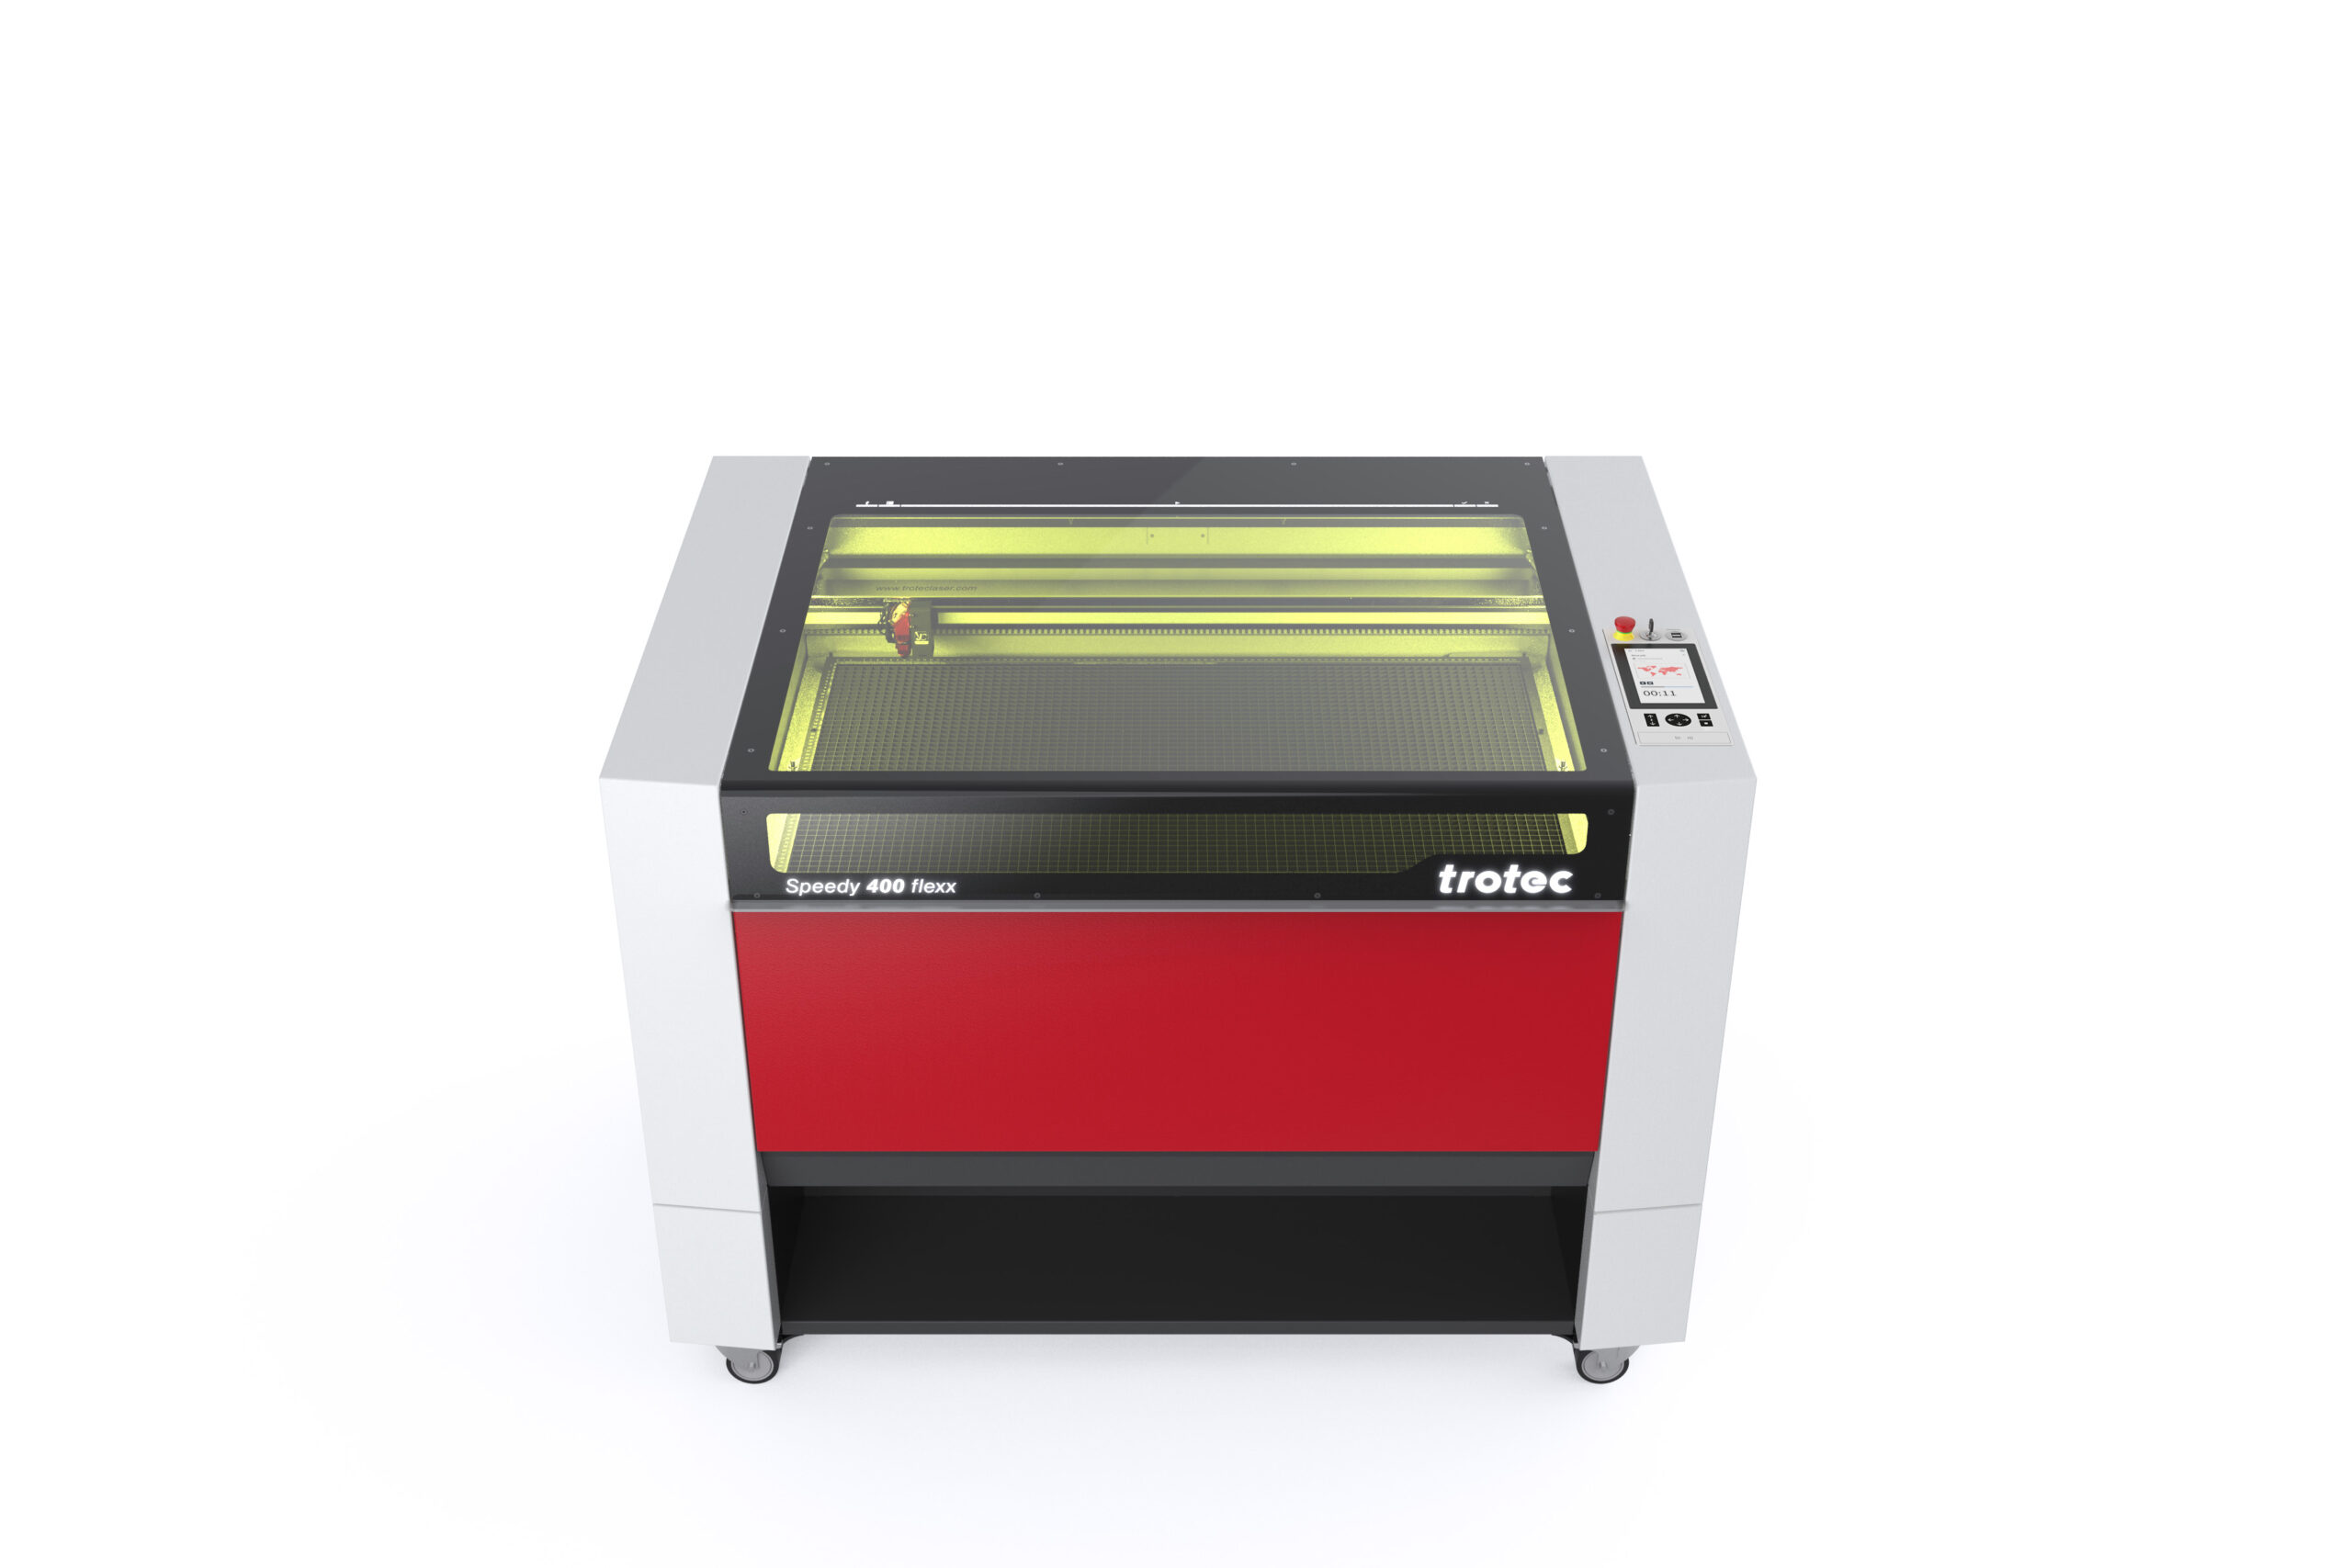 Trotec Speedy300 Laser Cutting and Engraving machine